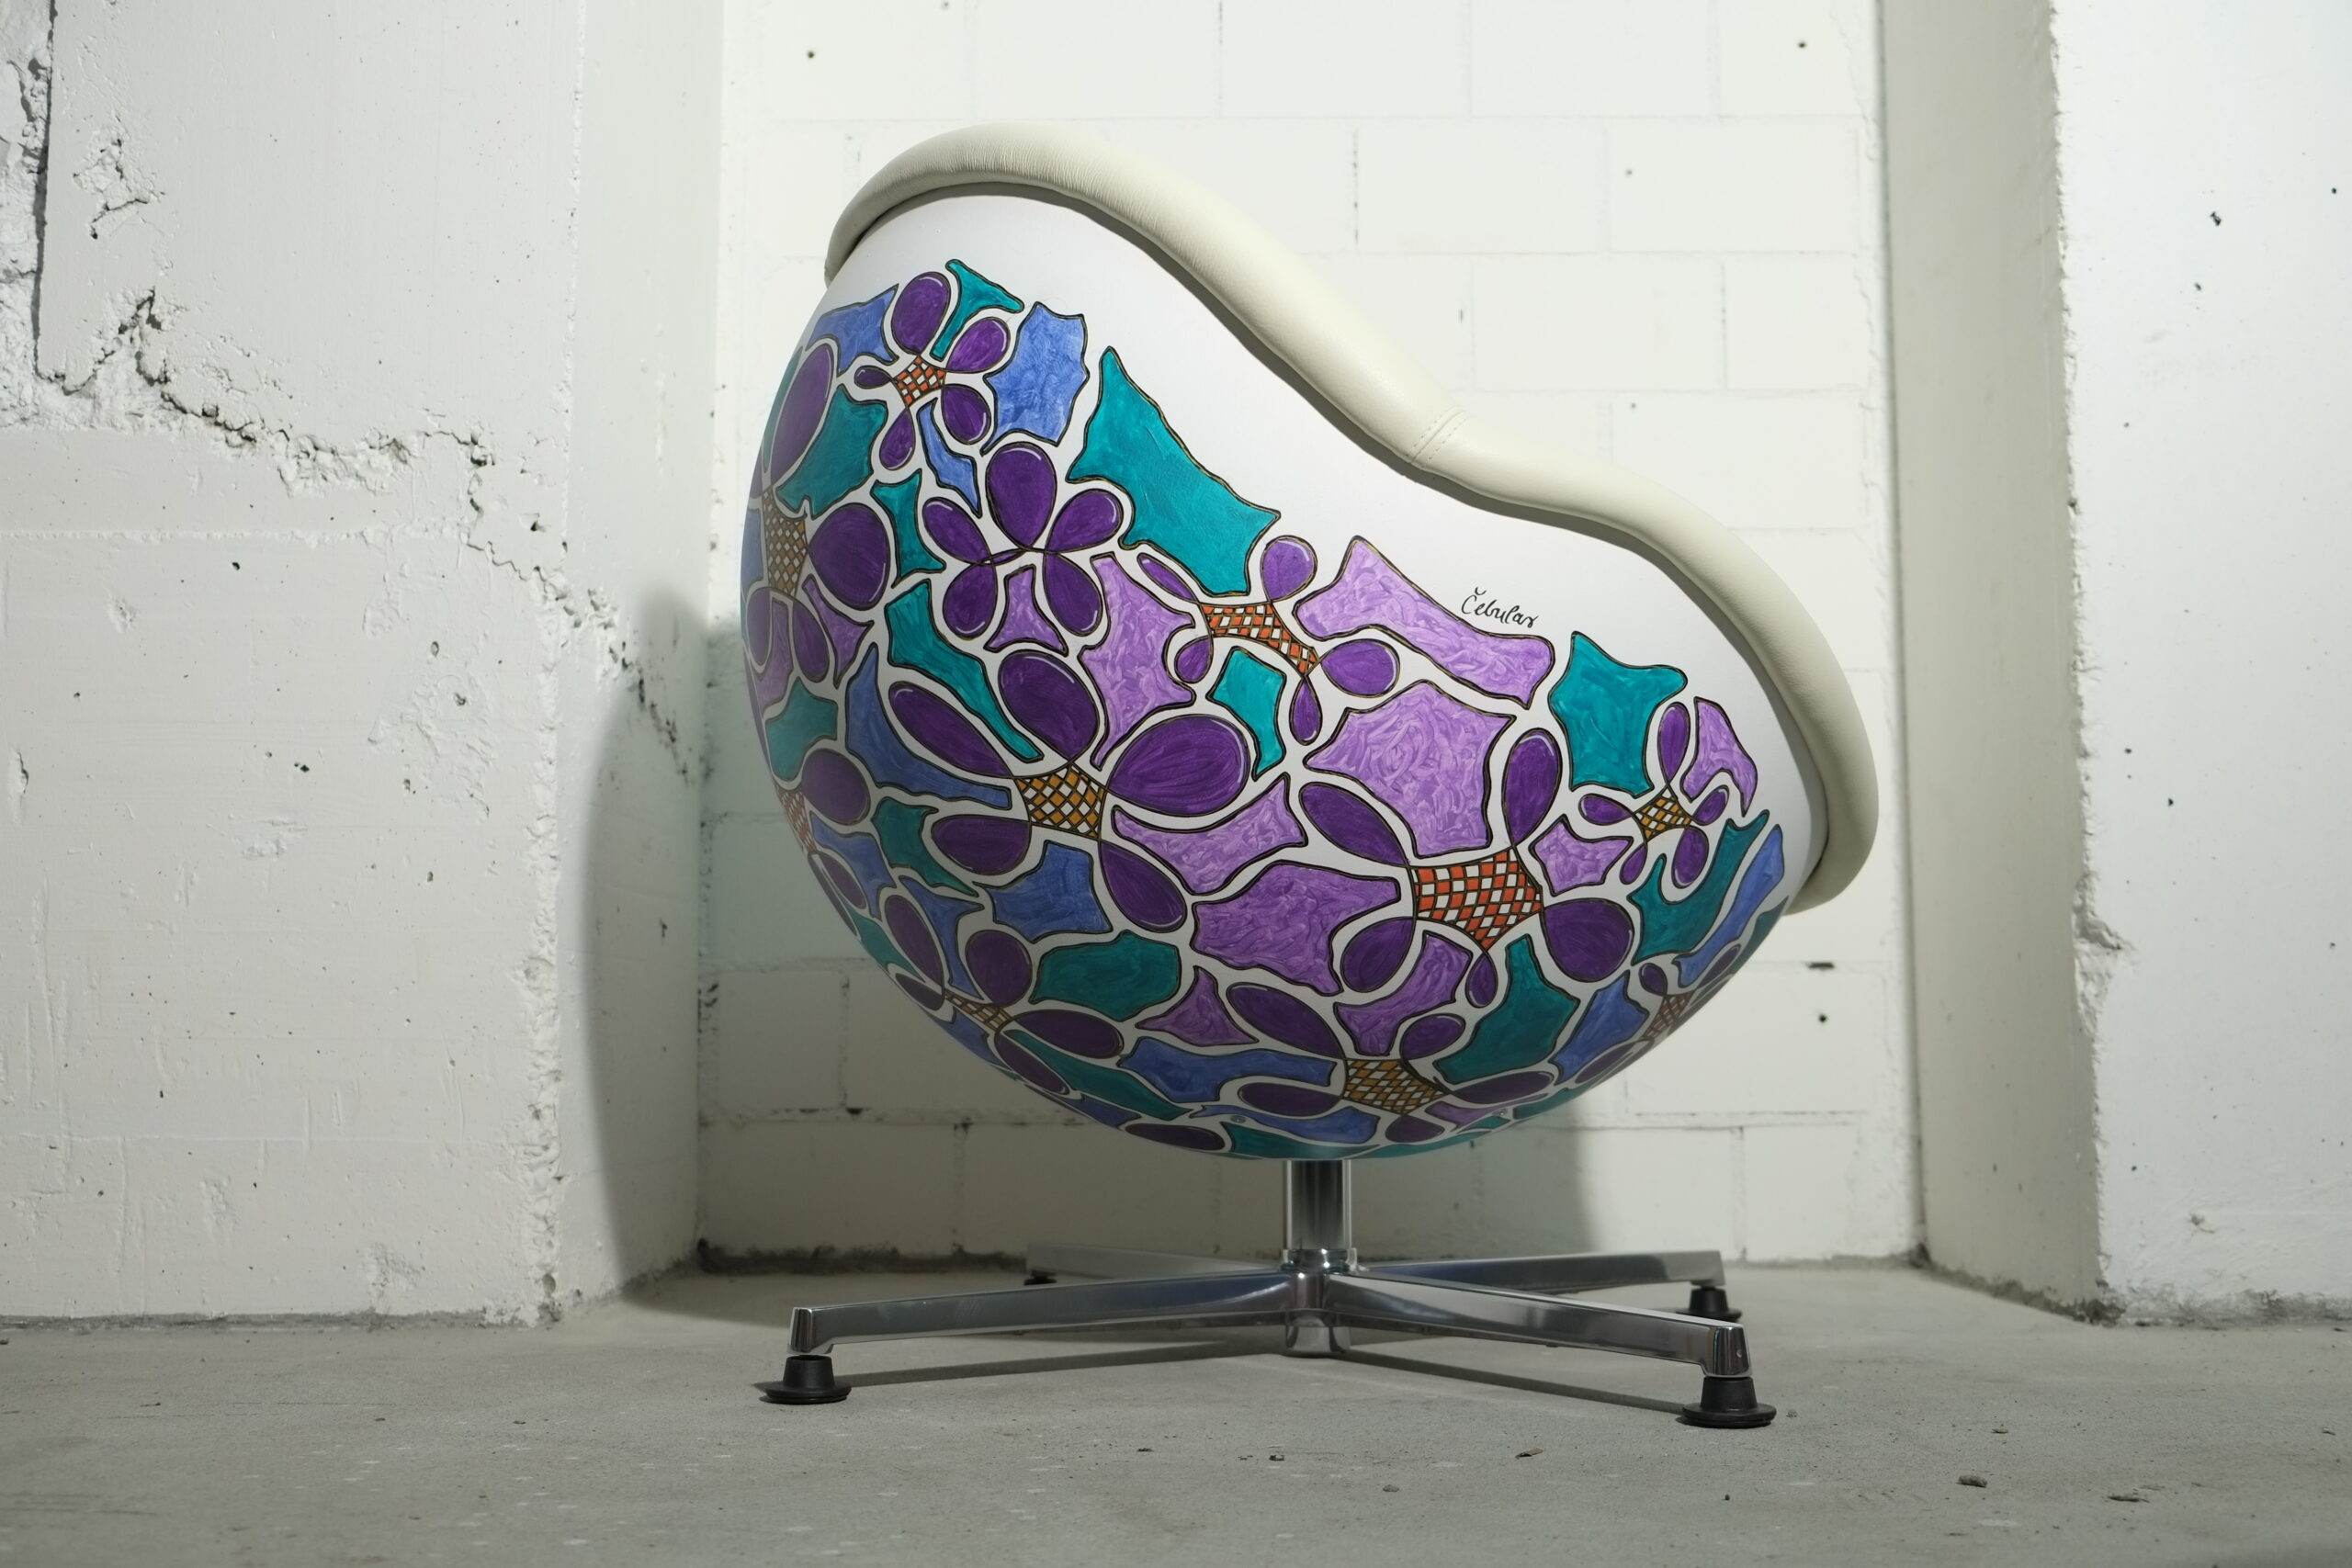 Playground Art Chair - 2014,
Original artwork on shell,
Markers and acrylic colors,
synthetic shell, leather seat cover,
height 90 cm, diameter 87 cm, seat height 40 cm